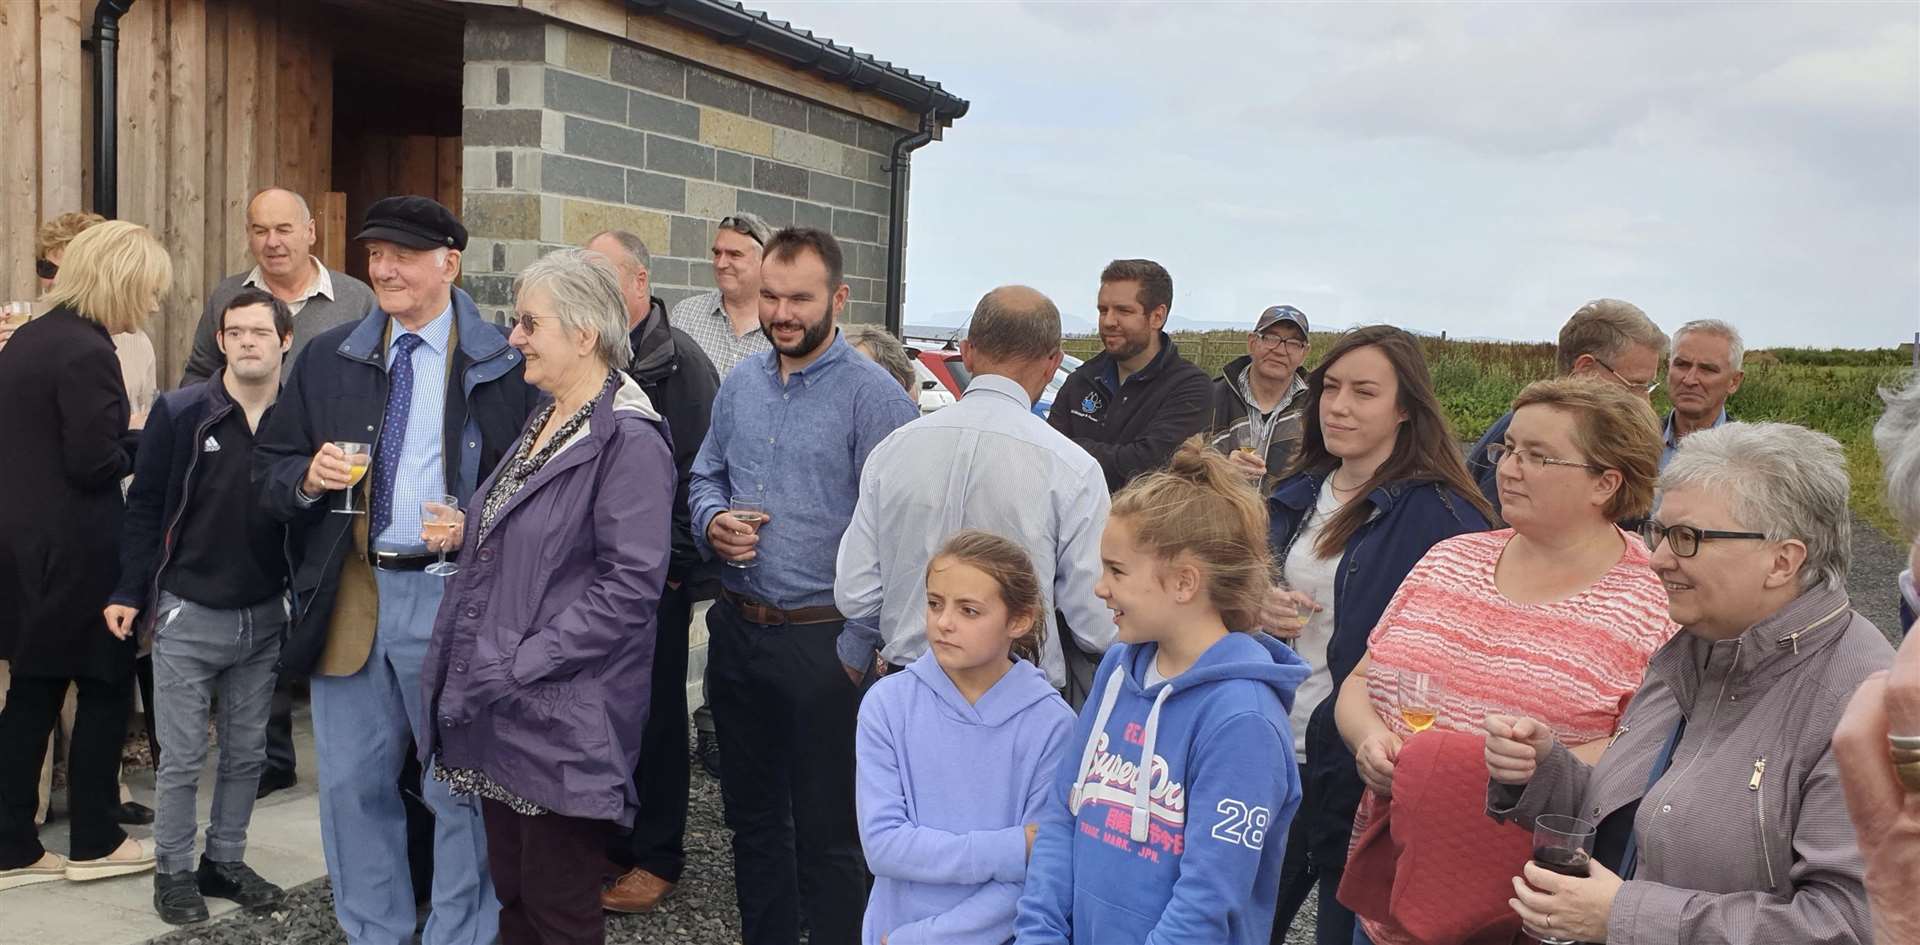 Onlookers at the official opening of the watersports base at Thurso East on Saturday.